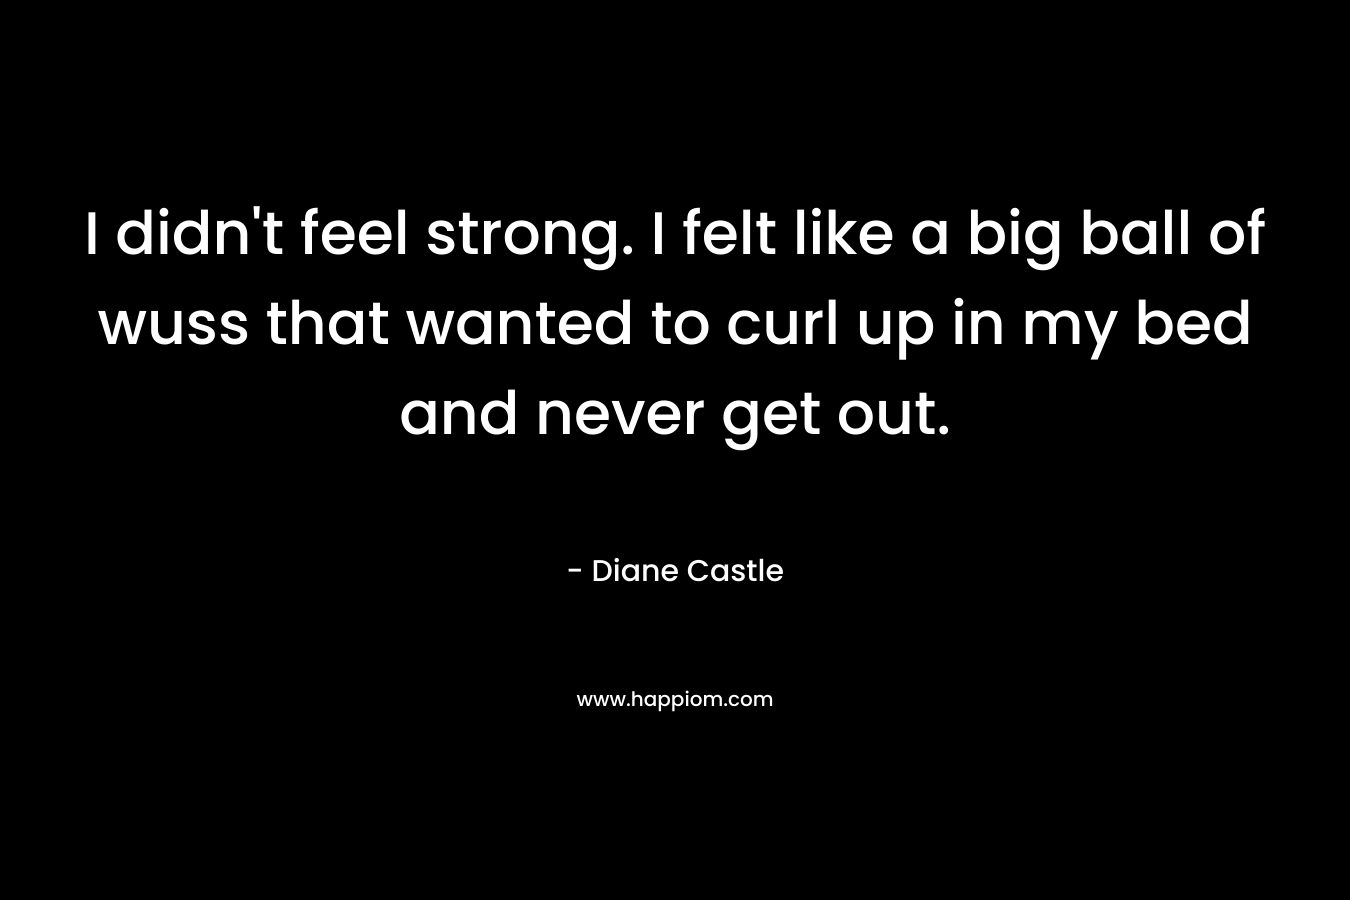 I didn’t feel strong. I felt like a big ball of wuss that wanted to curl up in my bed and never get out. – Diane Castle